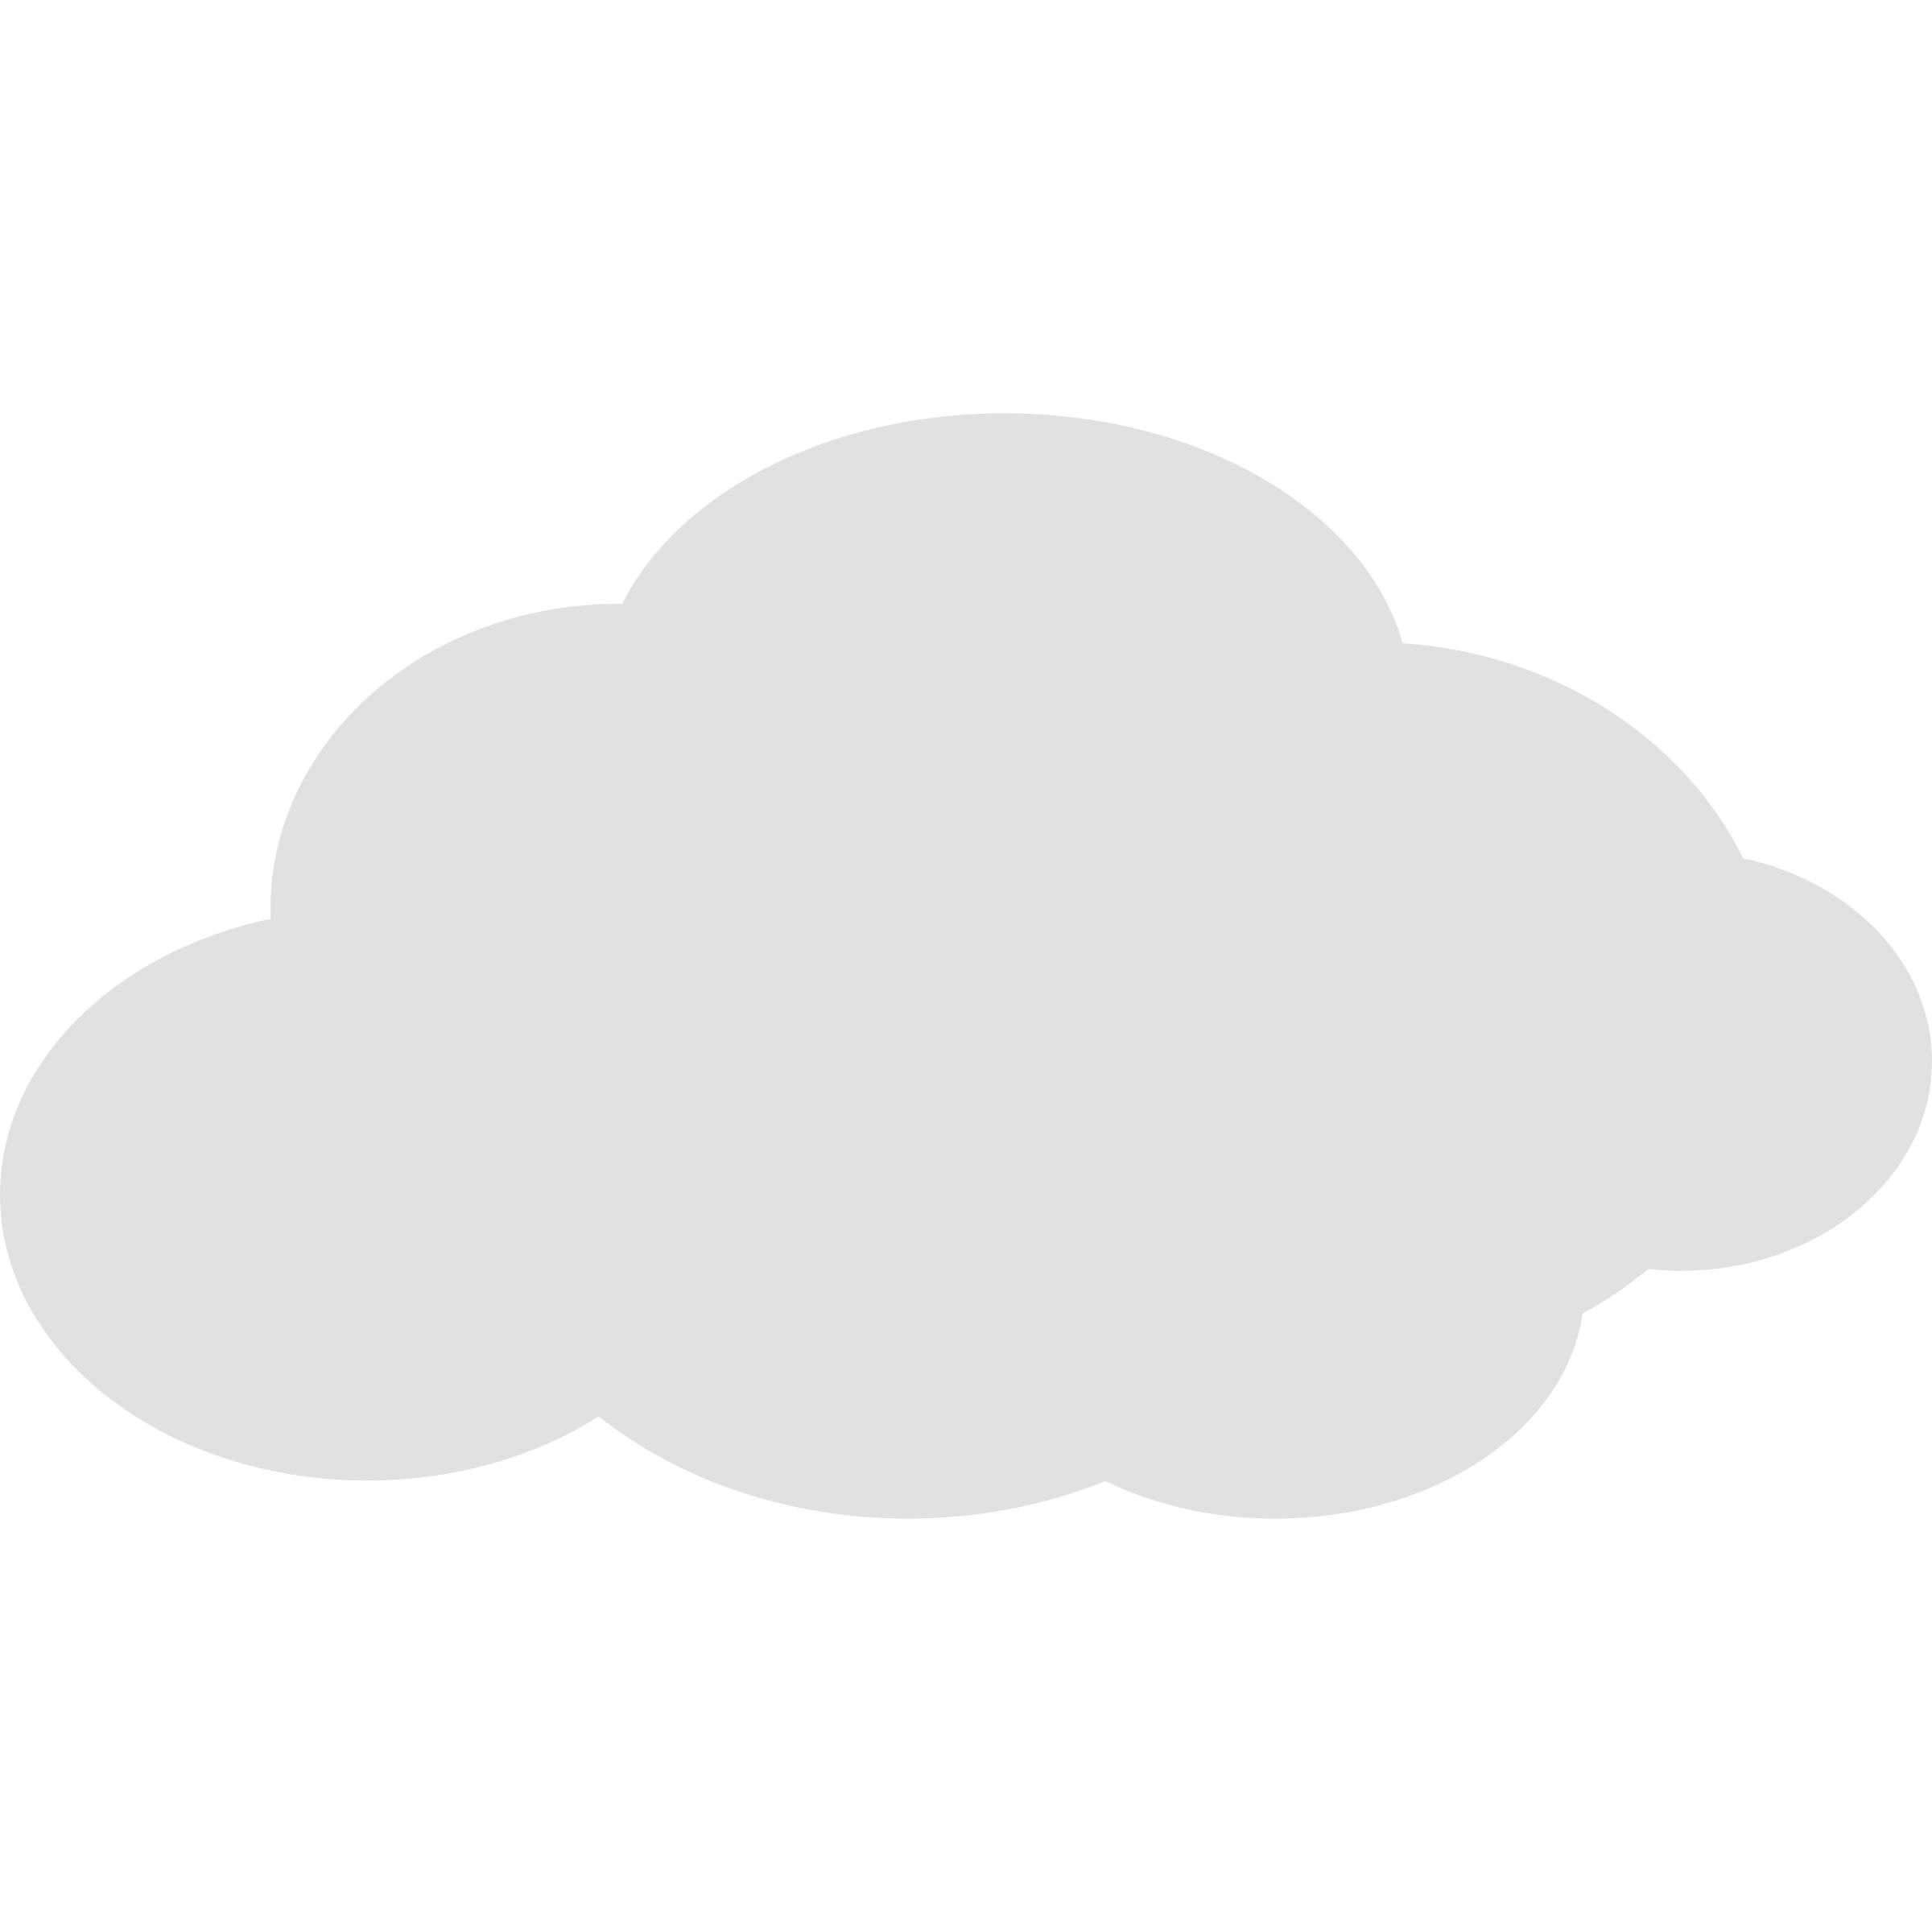 Outline of cloud clipart image 7 2